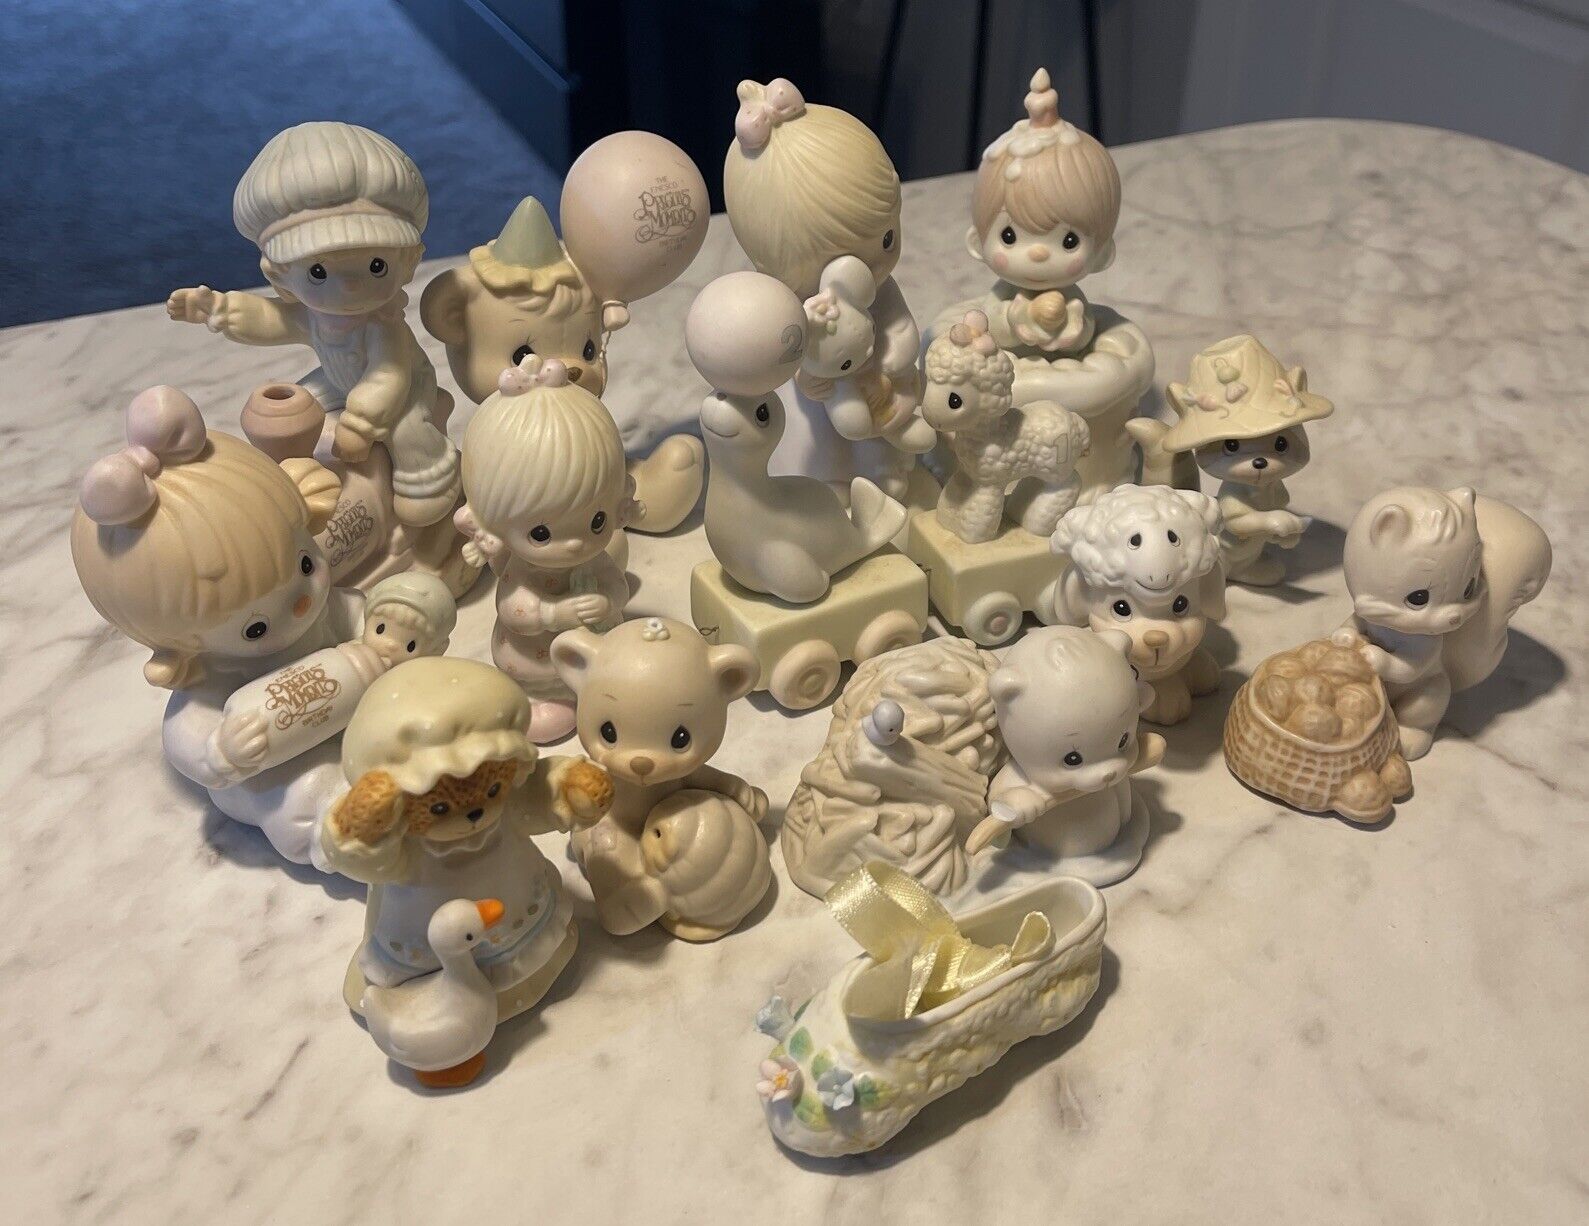 Rare Vintage Collectible Precious Moments by Enesco Figurines Animals Lucy Rigg